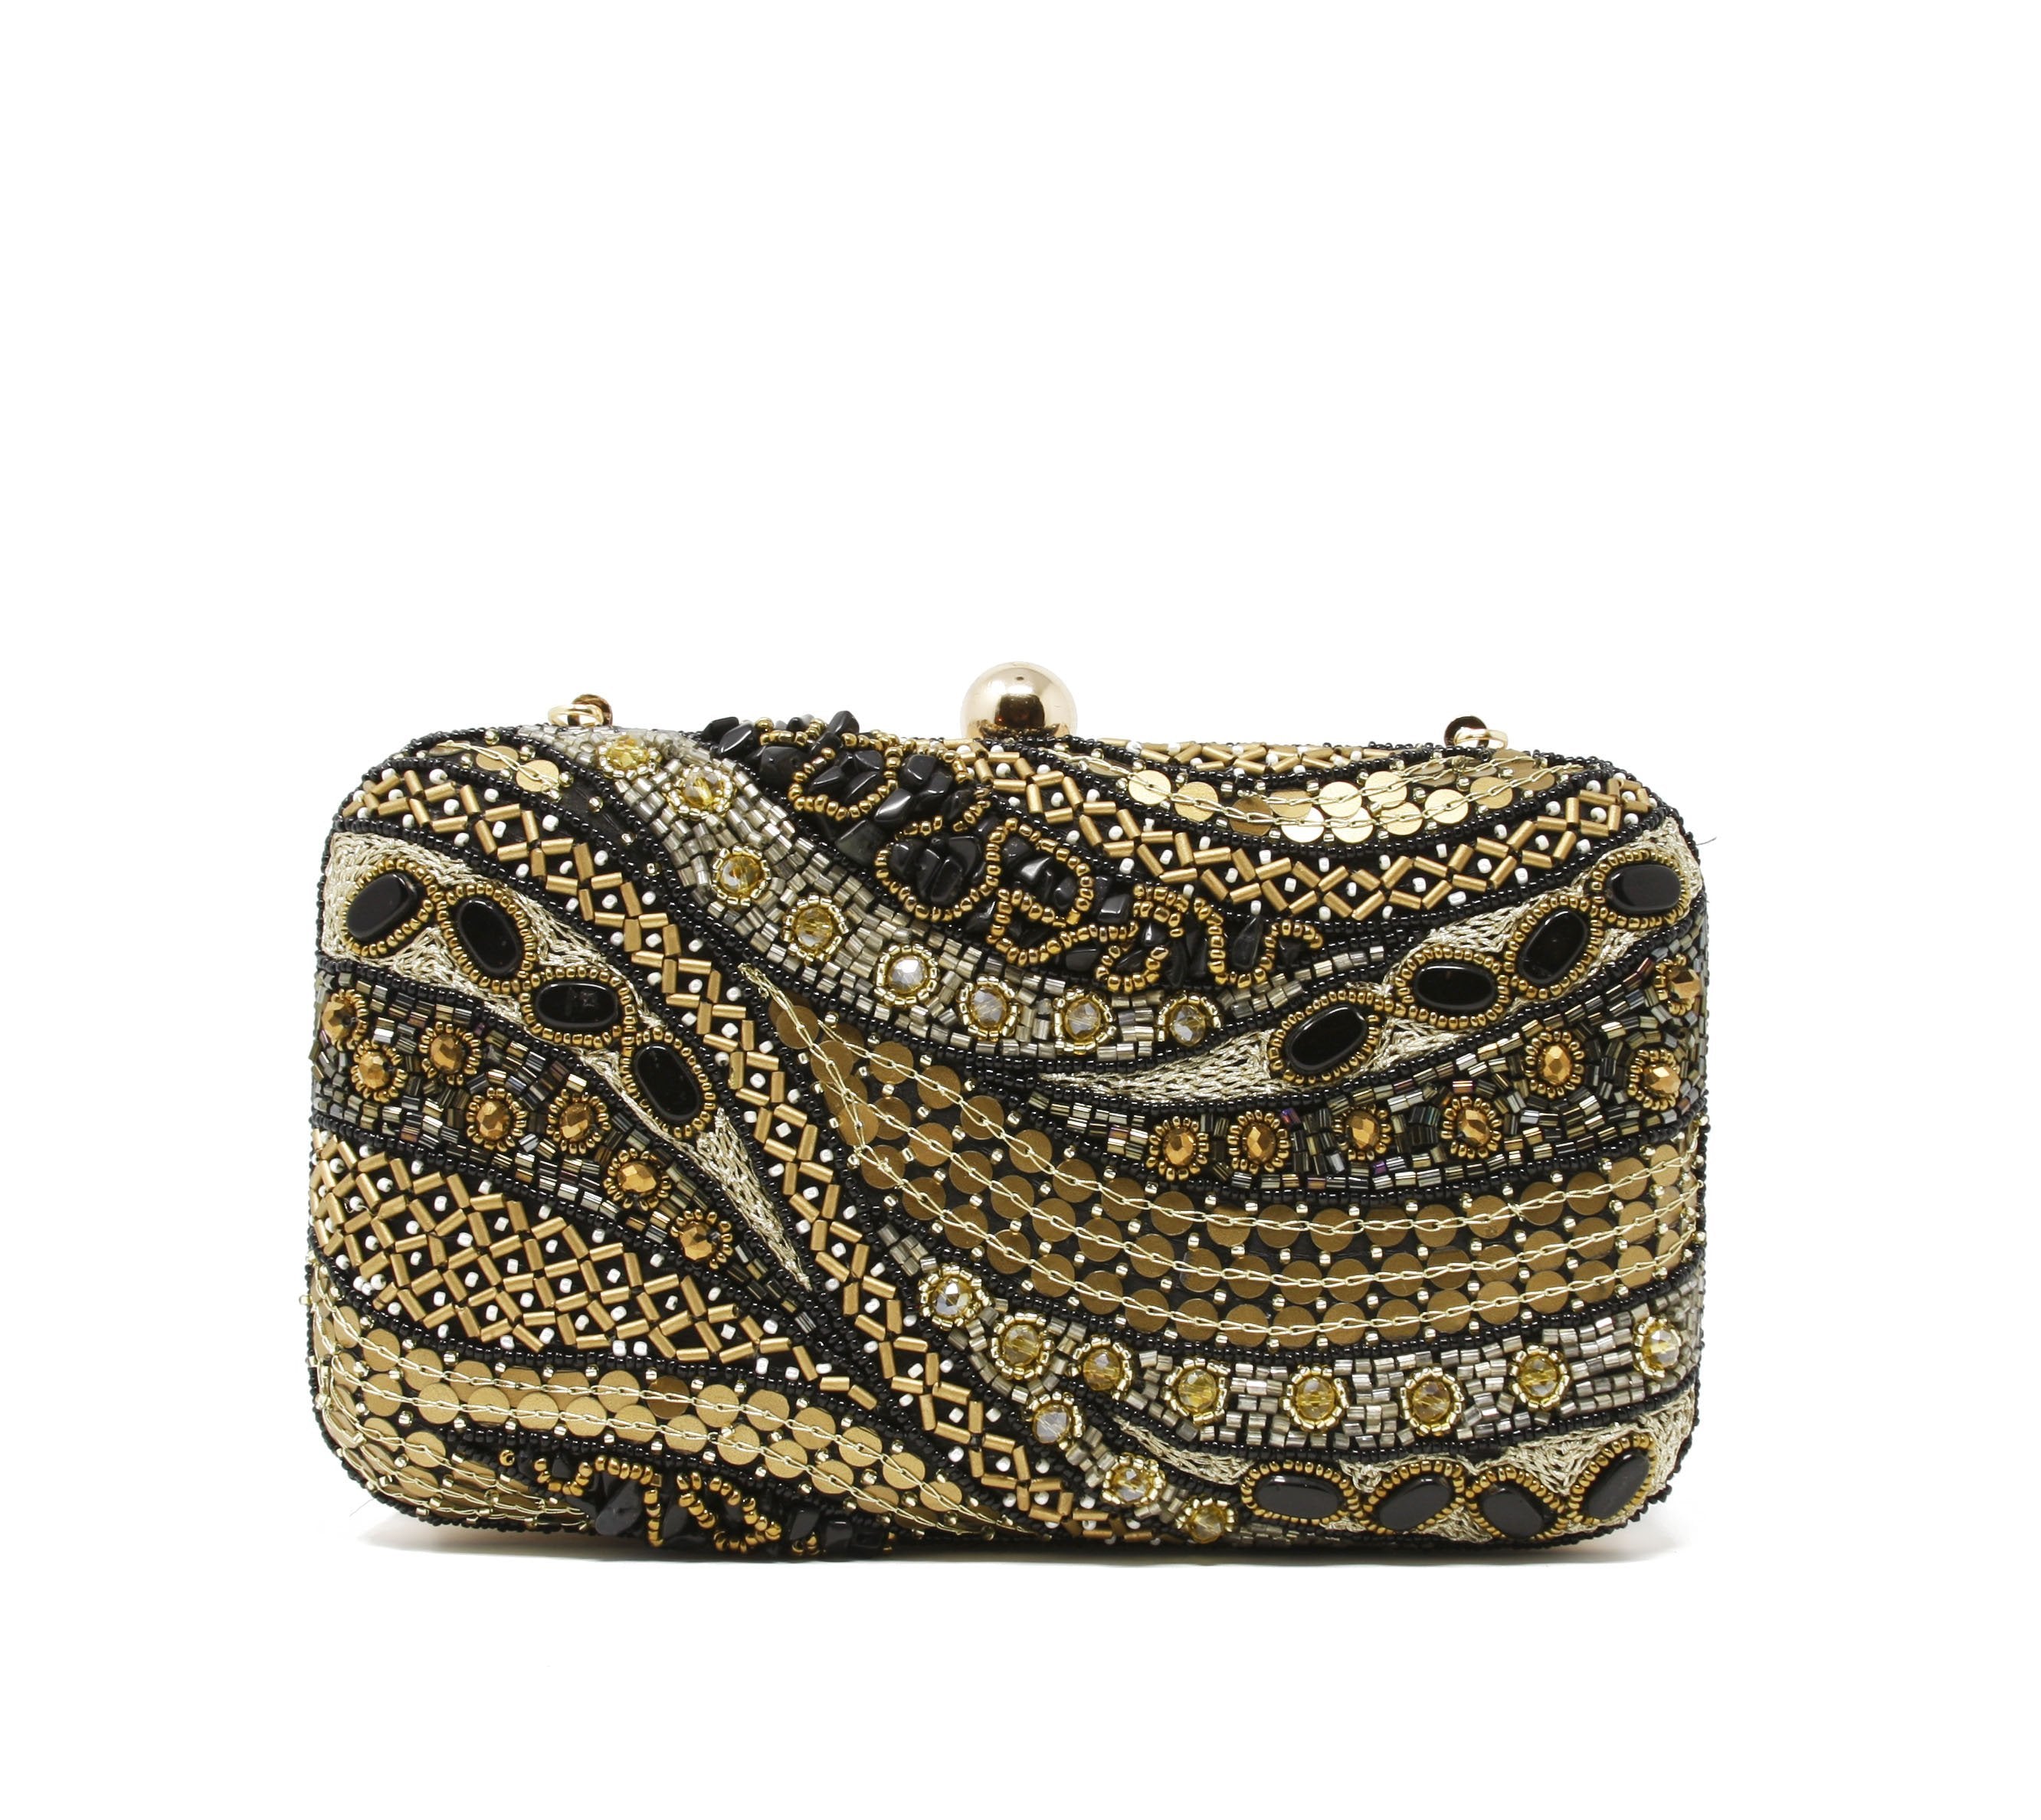  Black plain back  woven fabric evening bag with fold-over clasp closure included sparkly gold and black clutch. 